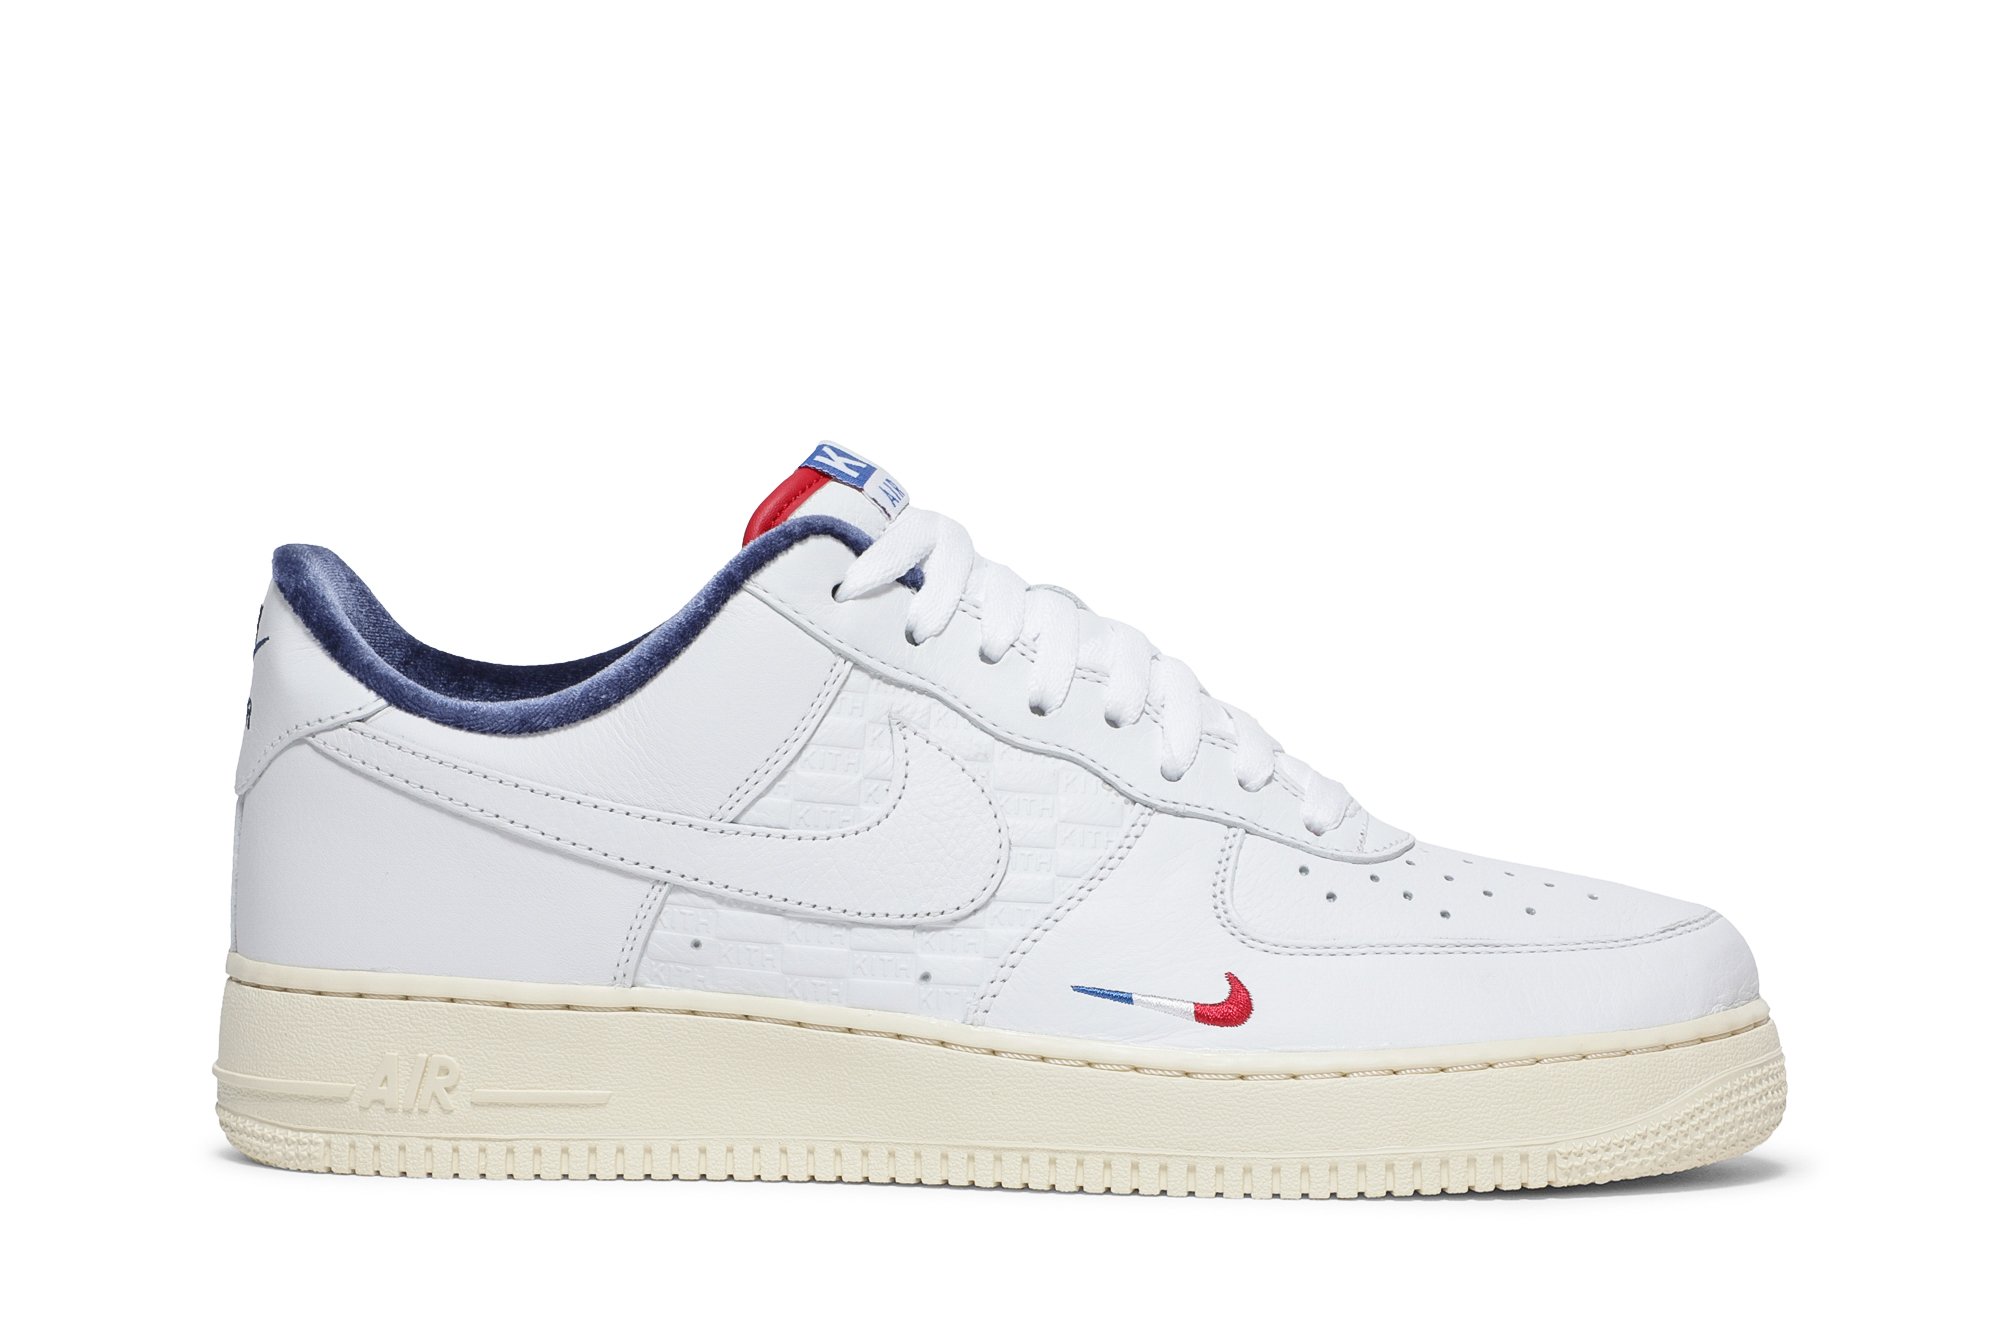 Buy Kith x Air Force 1 Low 'France' - CZ7927 100 | GOAT